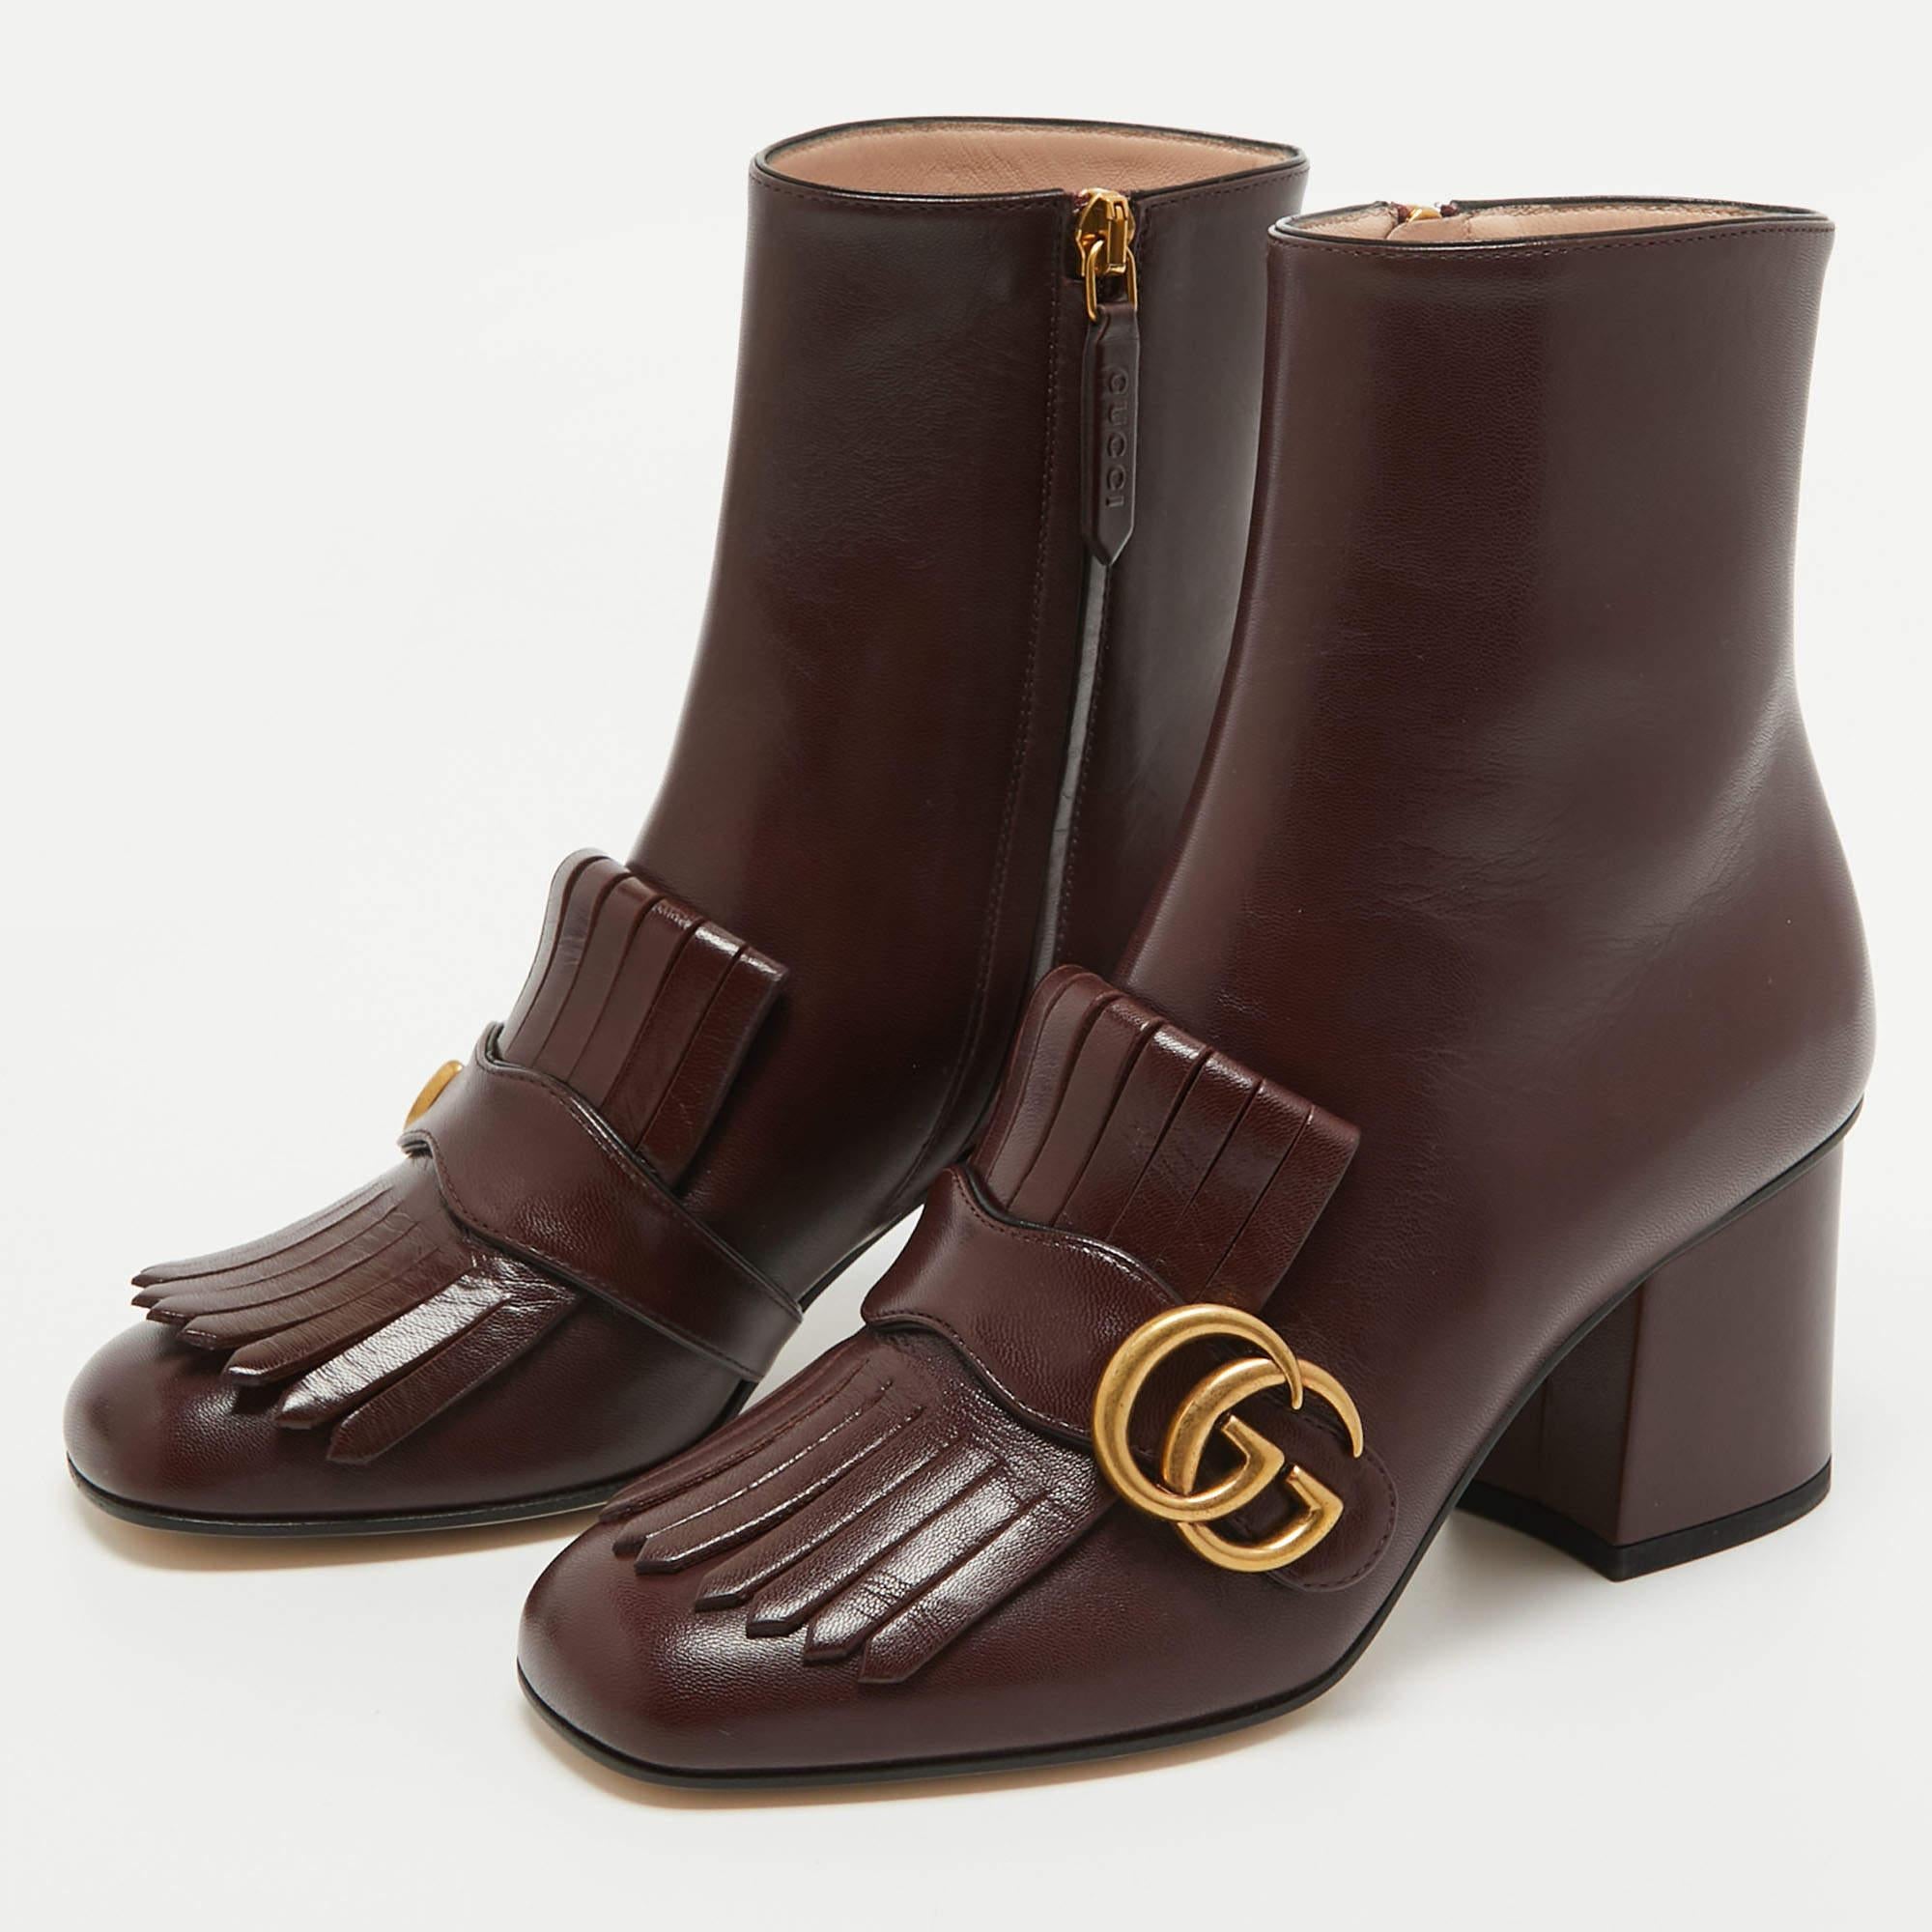 Gucci Burgundy Leather GG Marmont Fringe Ankle Boots Size 35.5 For Sale 3